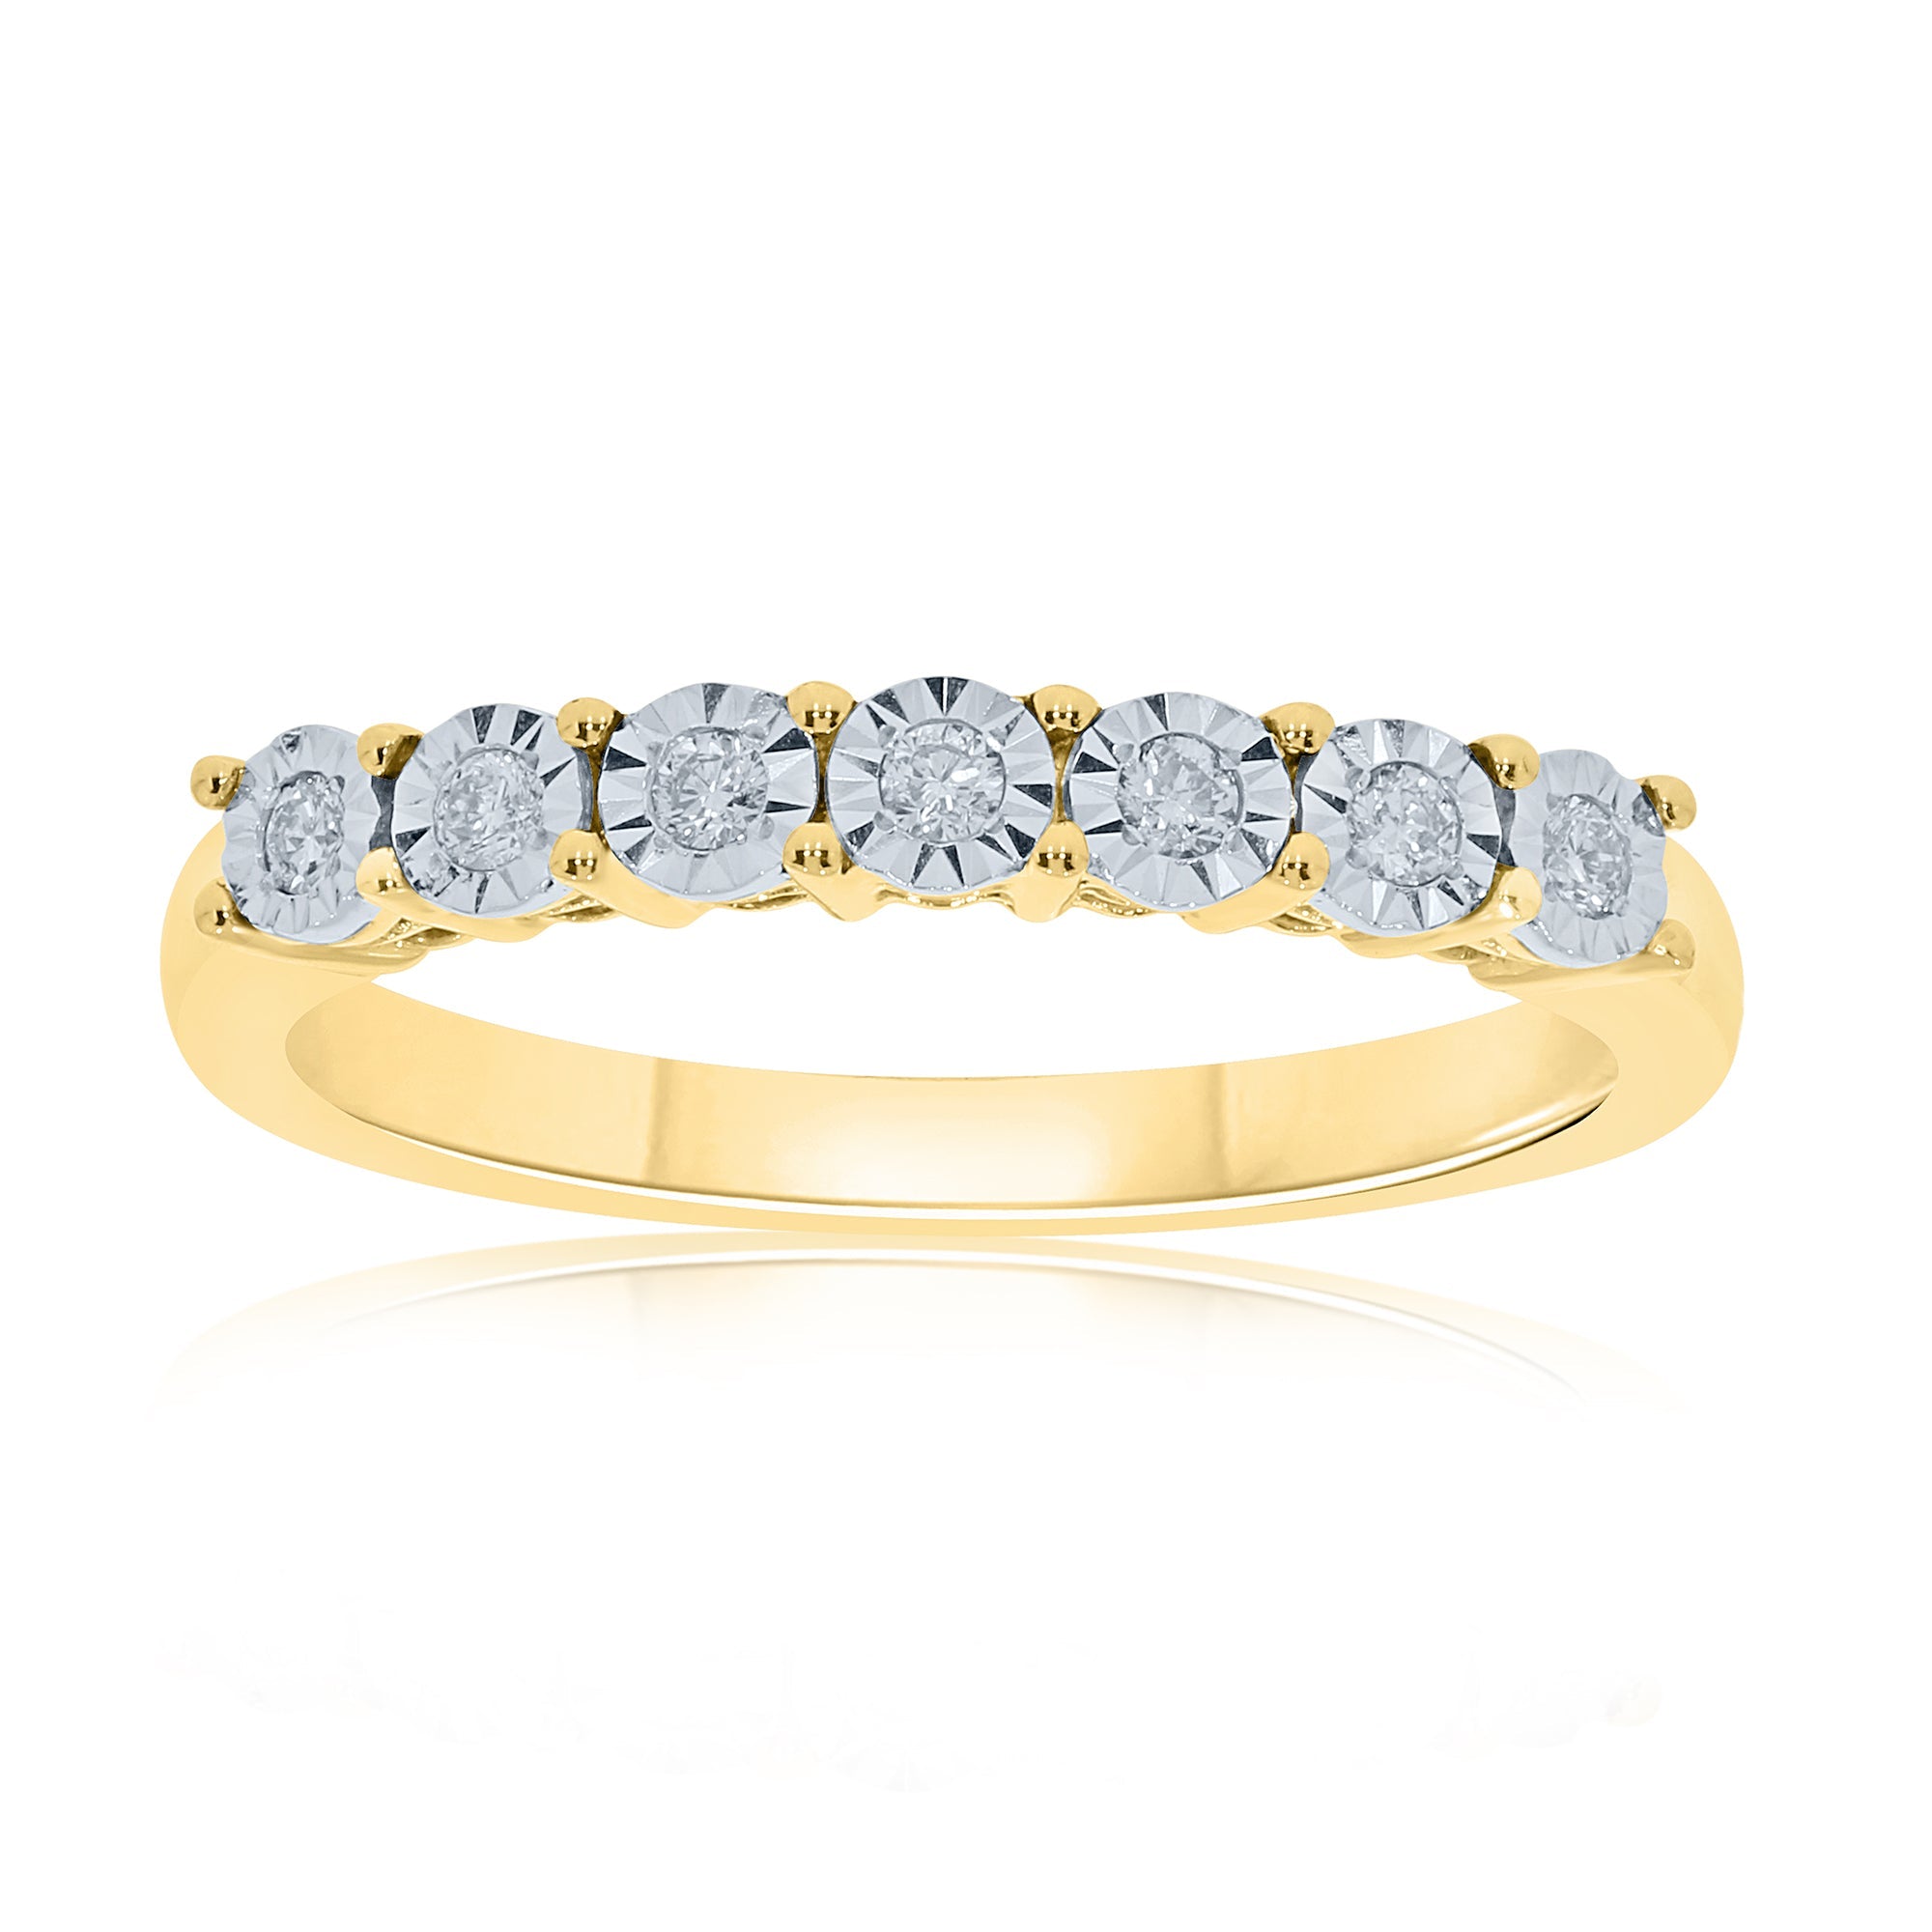 9ct gold 7 stone miracle plate diamond ring 0.15ct